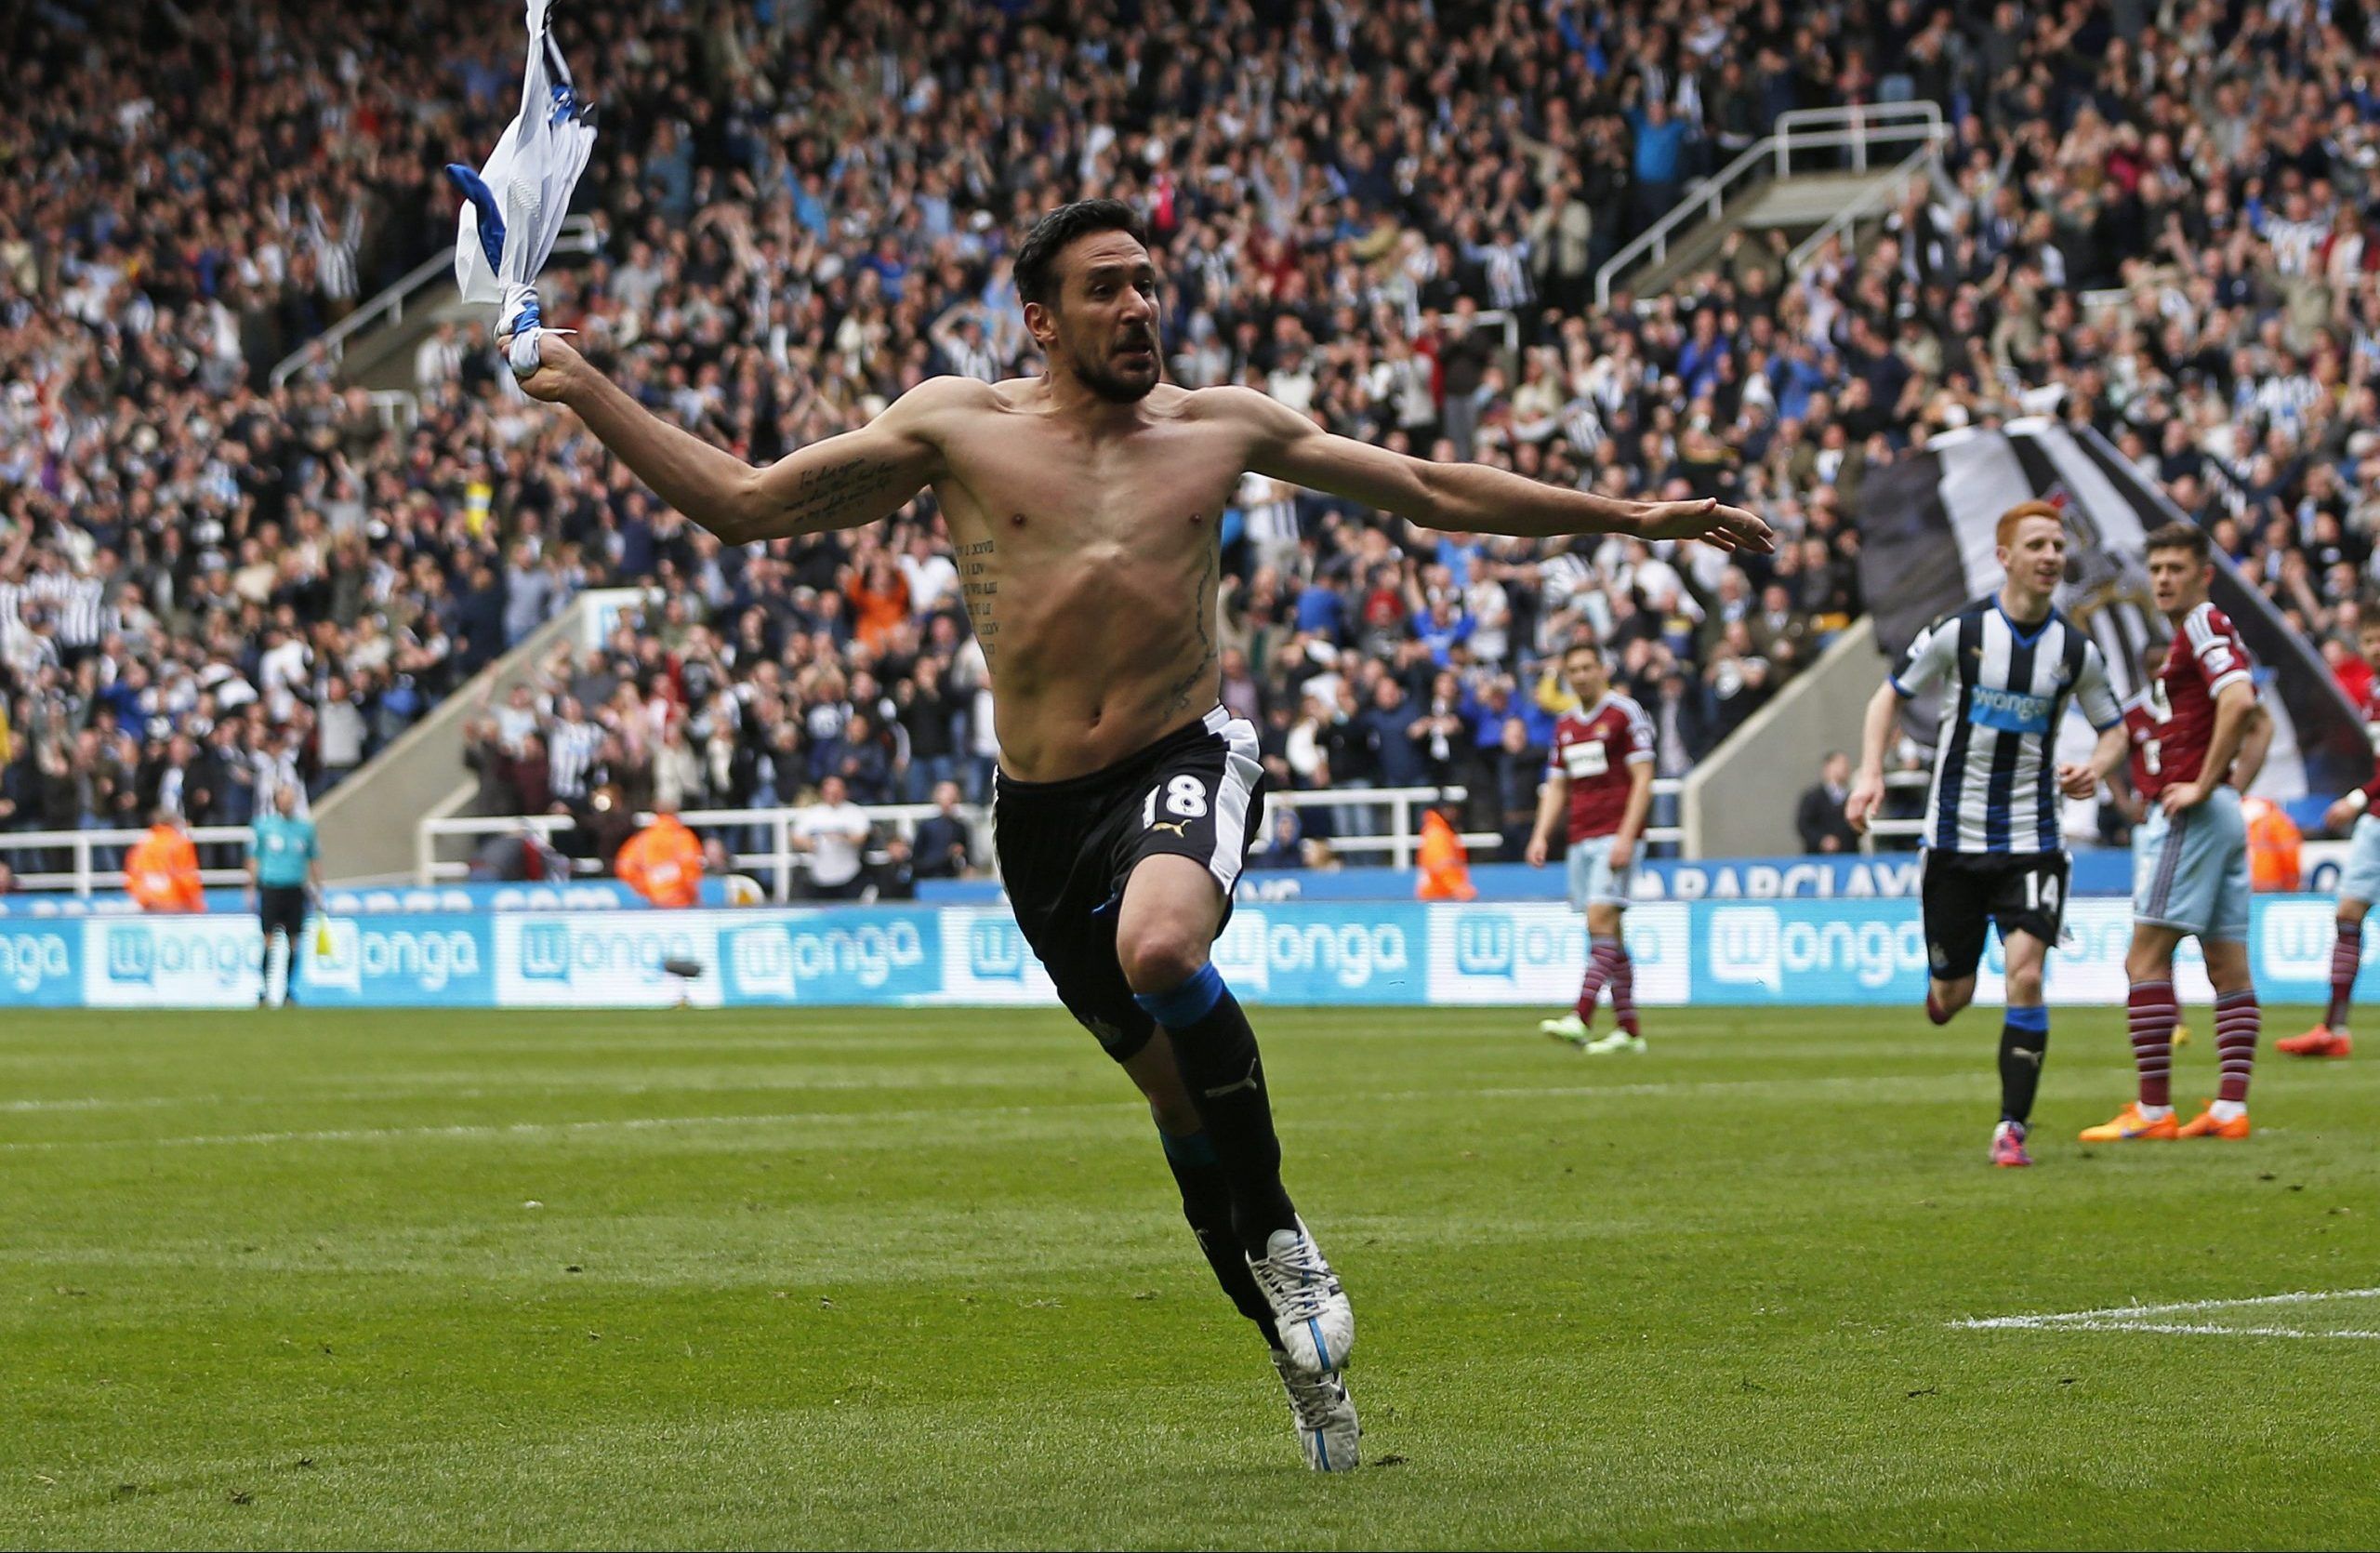 Football - Newcastle United v West Ham United - Barclays Premier League - St James' Park - 24/5/15
Newcastle's Jonas Gutierrez celebrates scoring their second goal 
Action Images via Reuters / Lee Smith
Livepic
EDITORIAL USE ONLY. No use with unauthorized audio, video, data, fixture lists, club/league logos or 